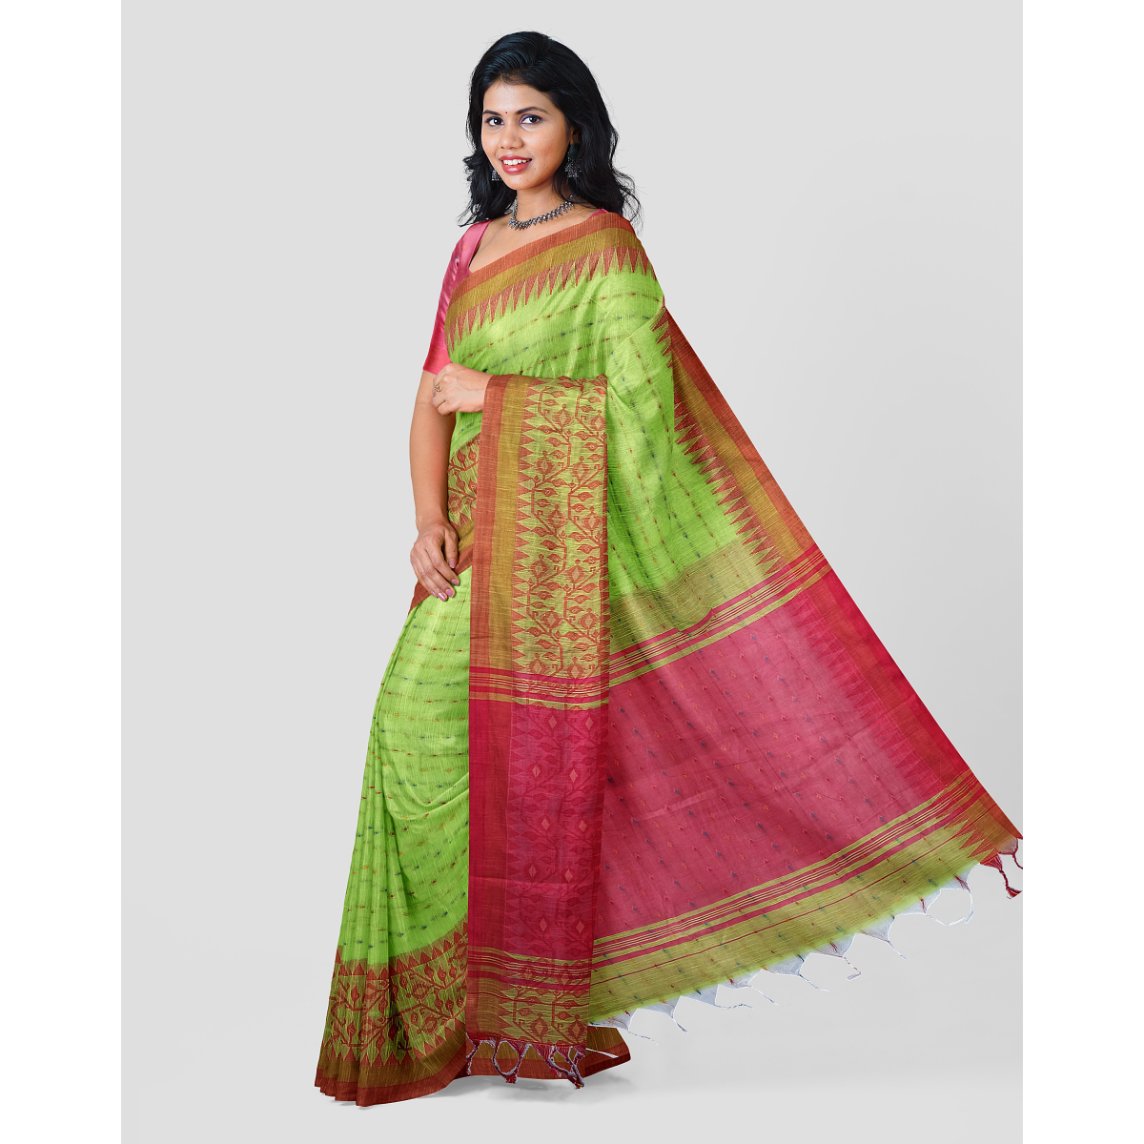 Printed Handloom Cotton Saree Manufacturer Supplier from Nadia India